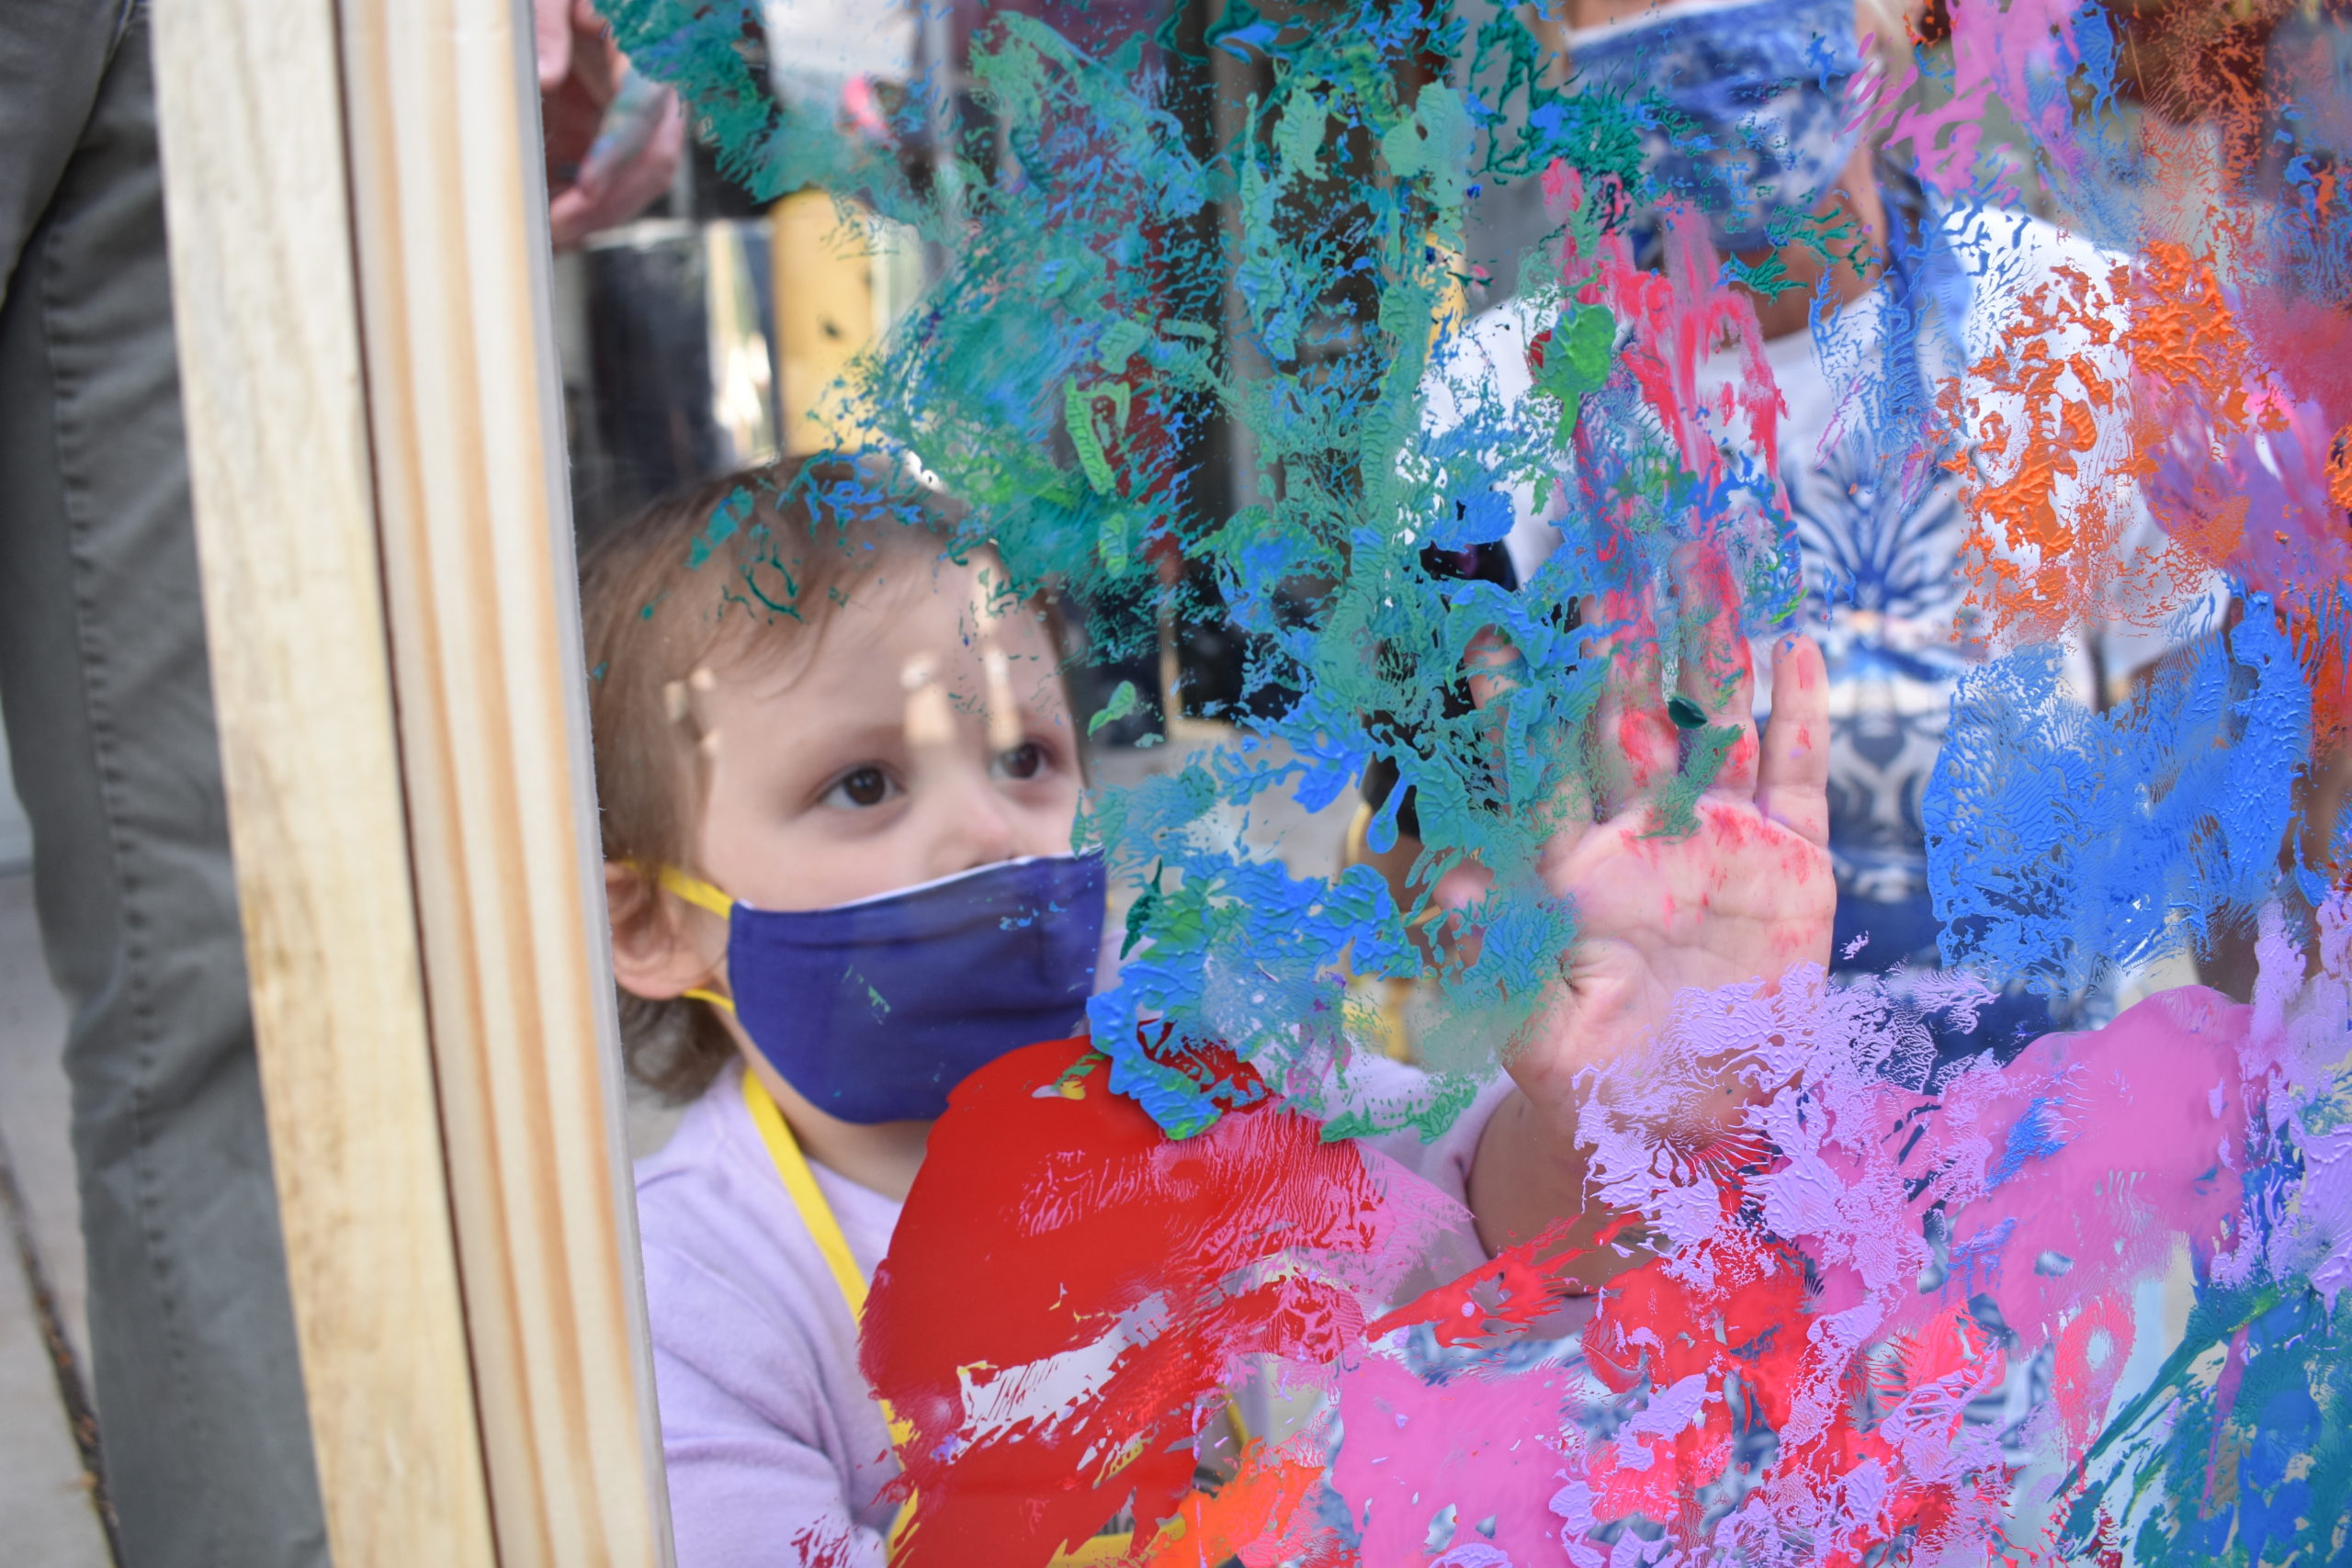 A child touching a piece of clear plastic covered with paint